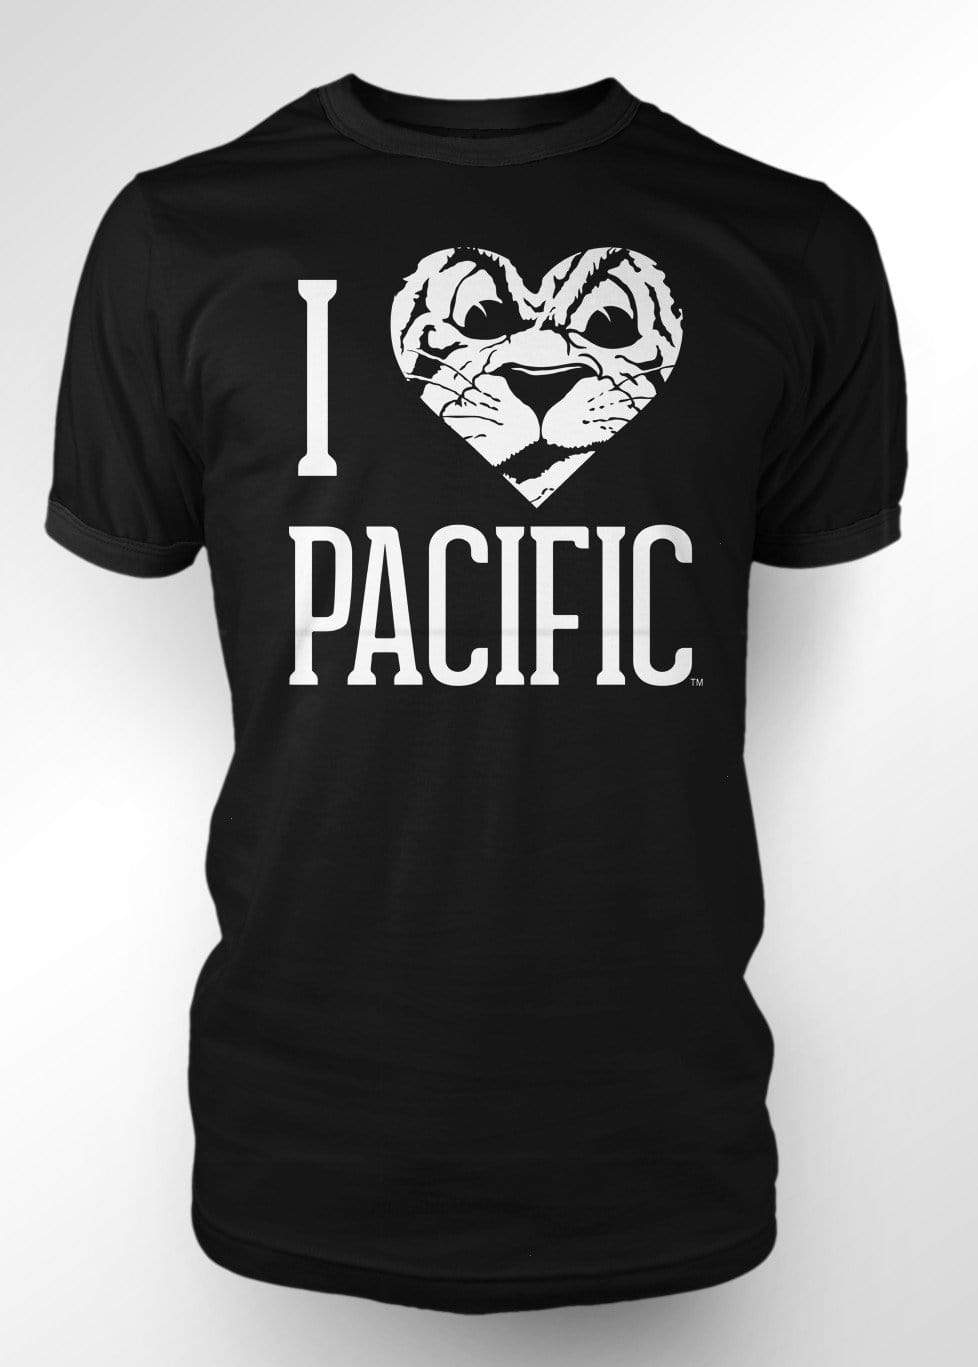 University of the Pacific Tigers I Love Pacific: Tommy Tiger T-shirt by Zeus Collegiate